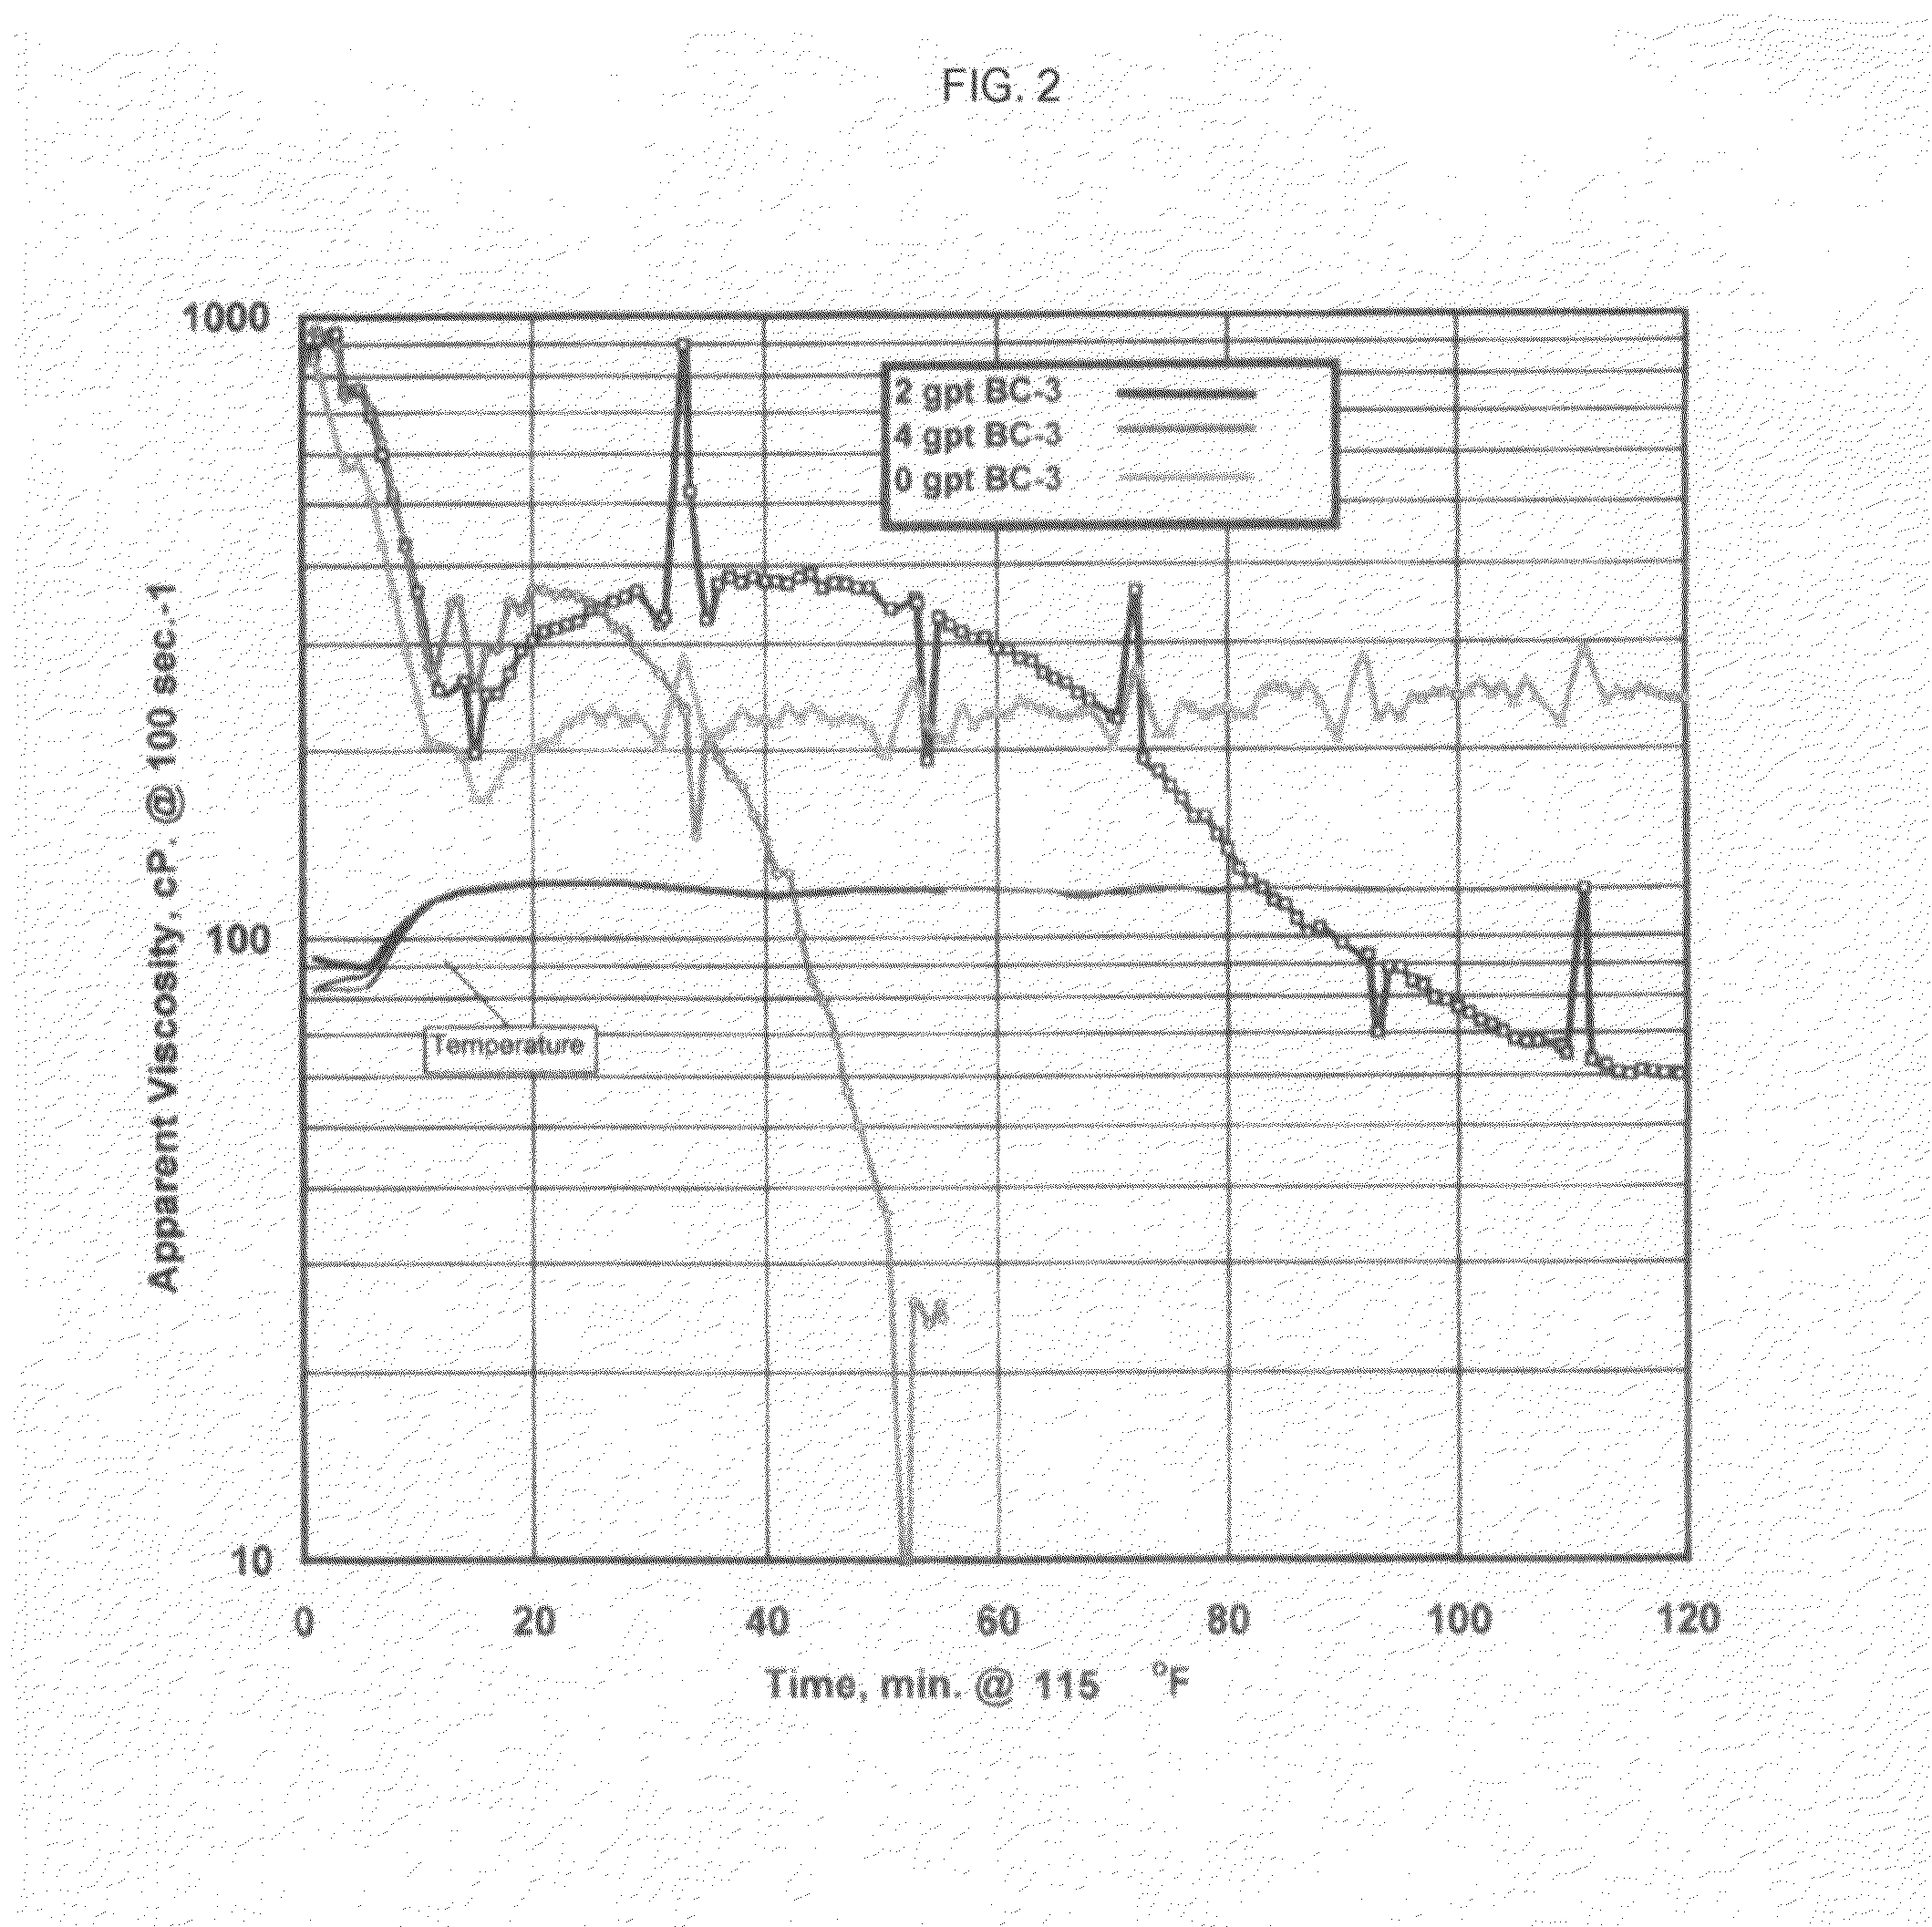 Aqueous alcohol well treatment fluid and method of using the same